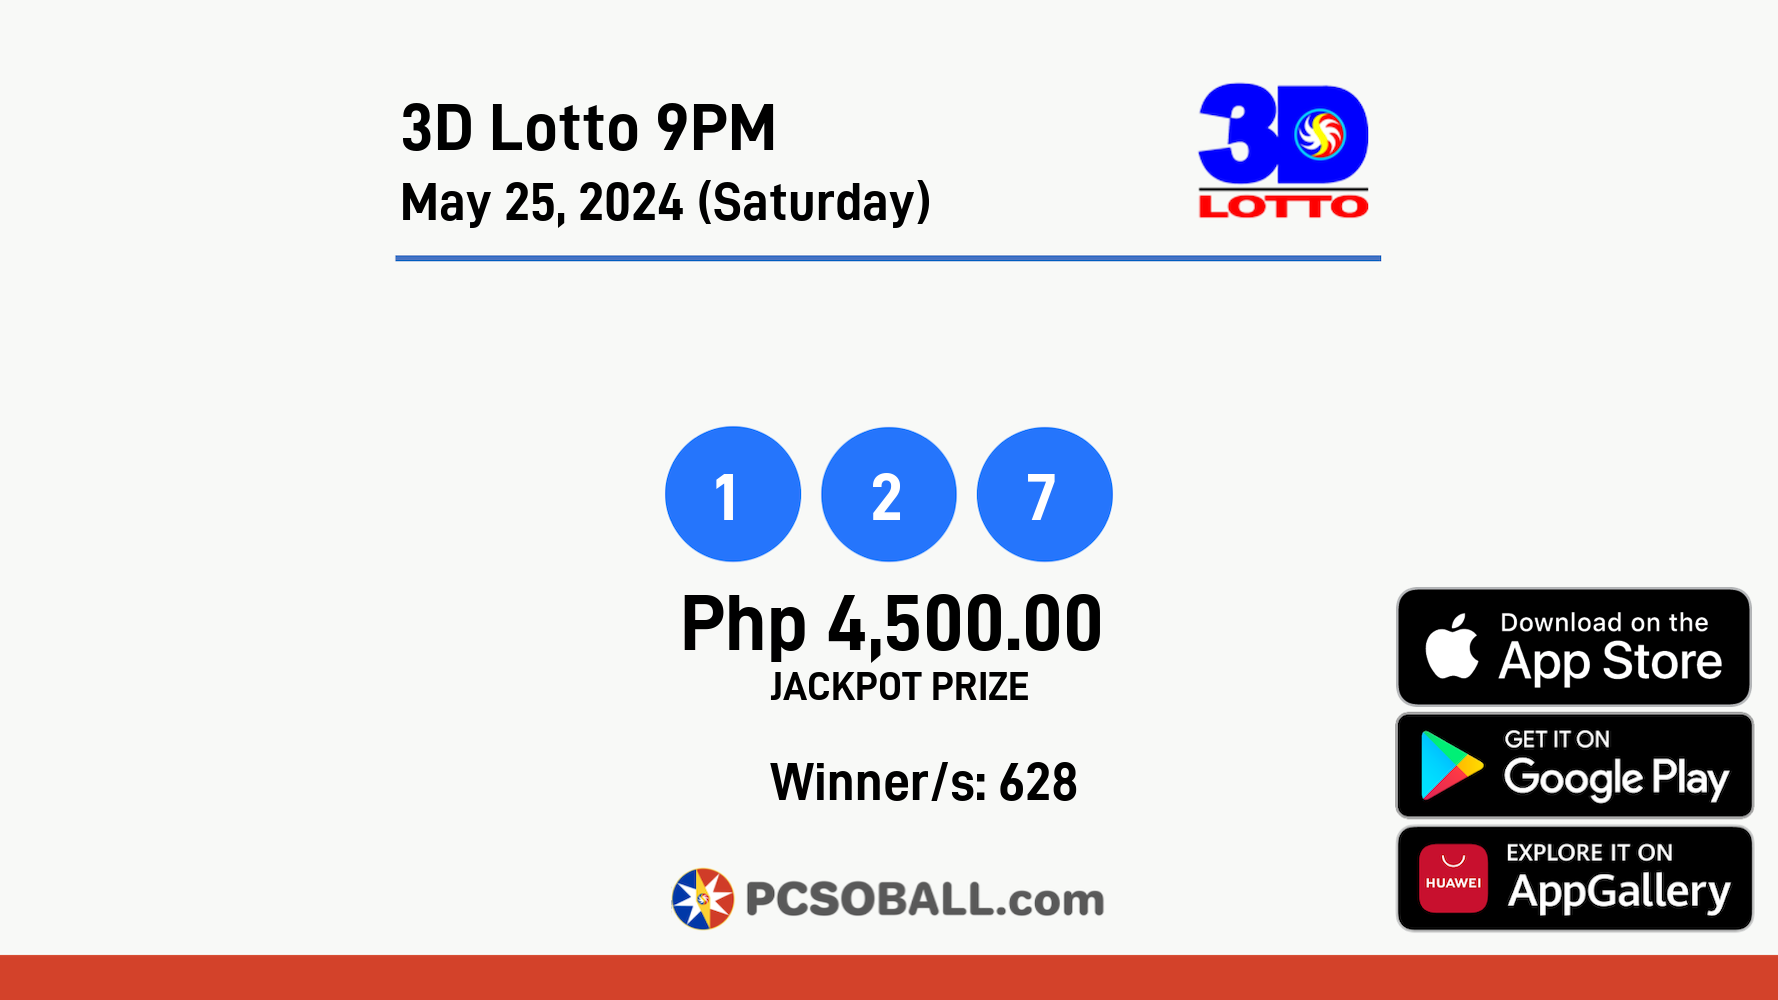 3D Lotto 9PM May 25, 2024 (Saturday) Result